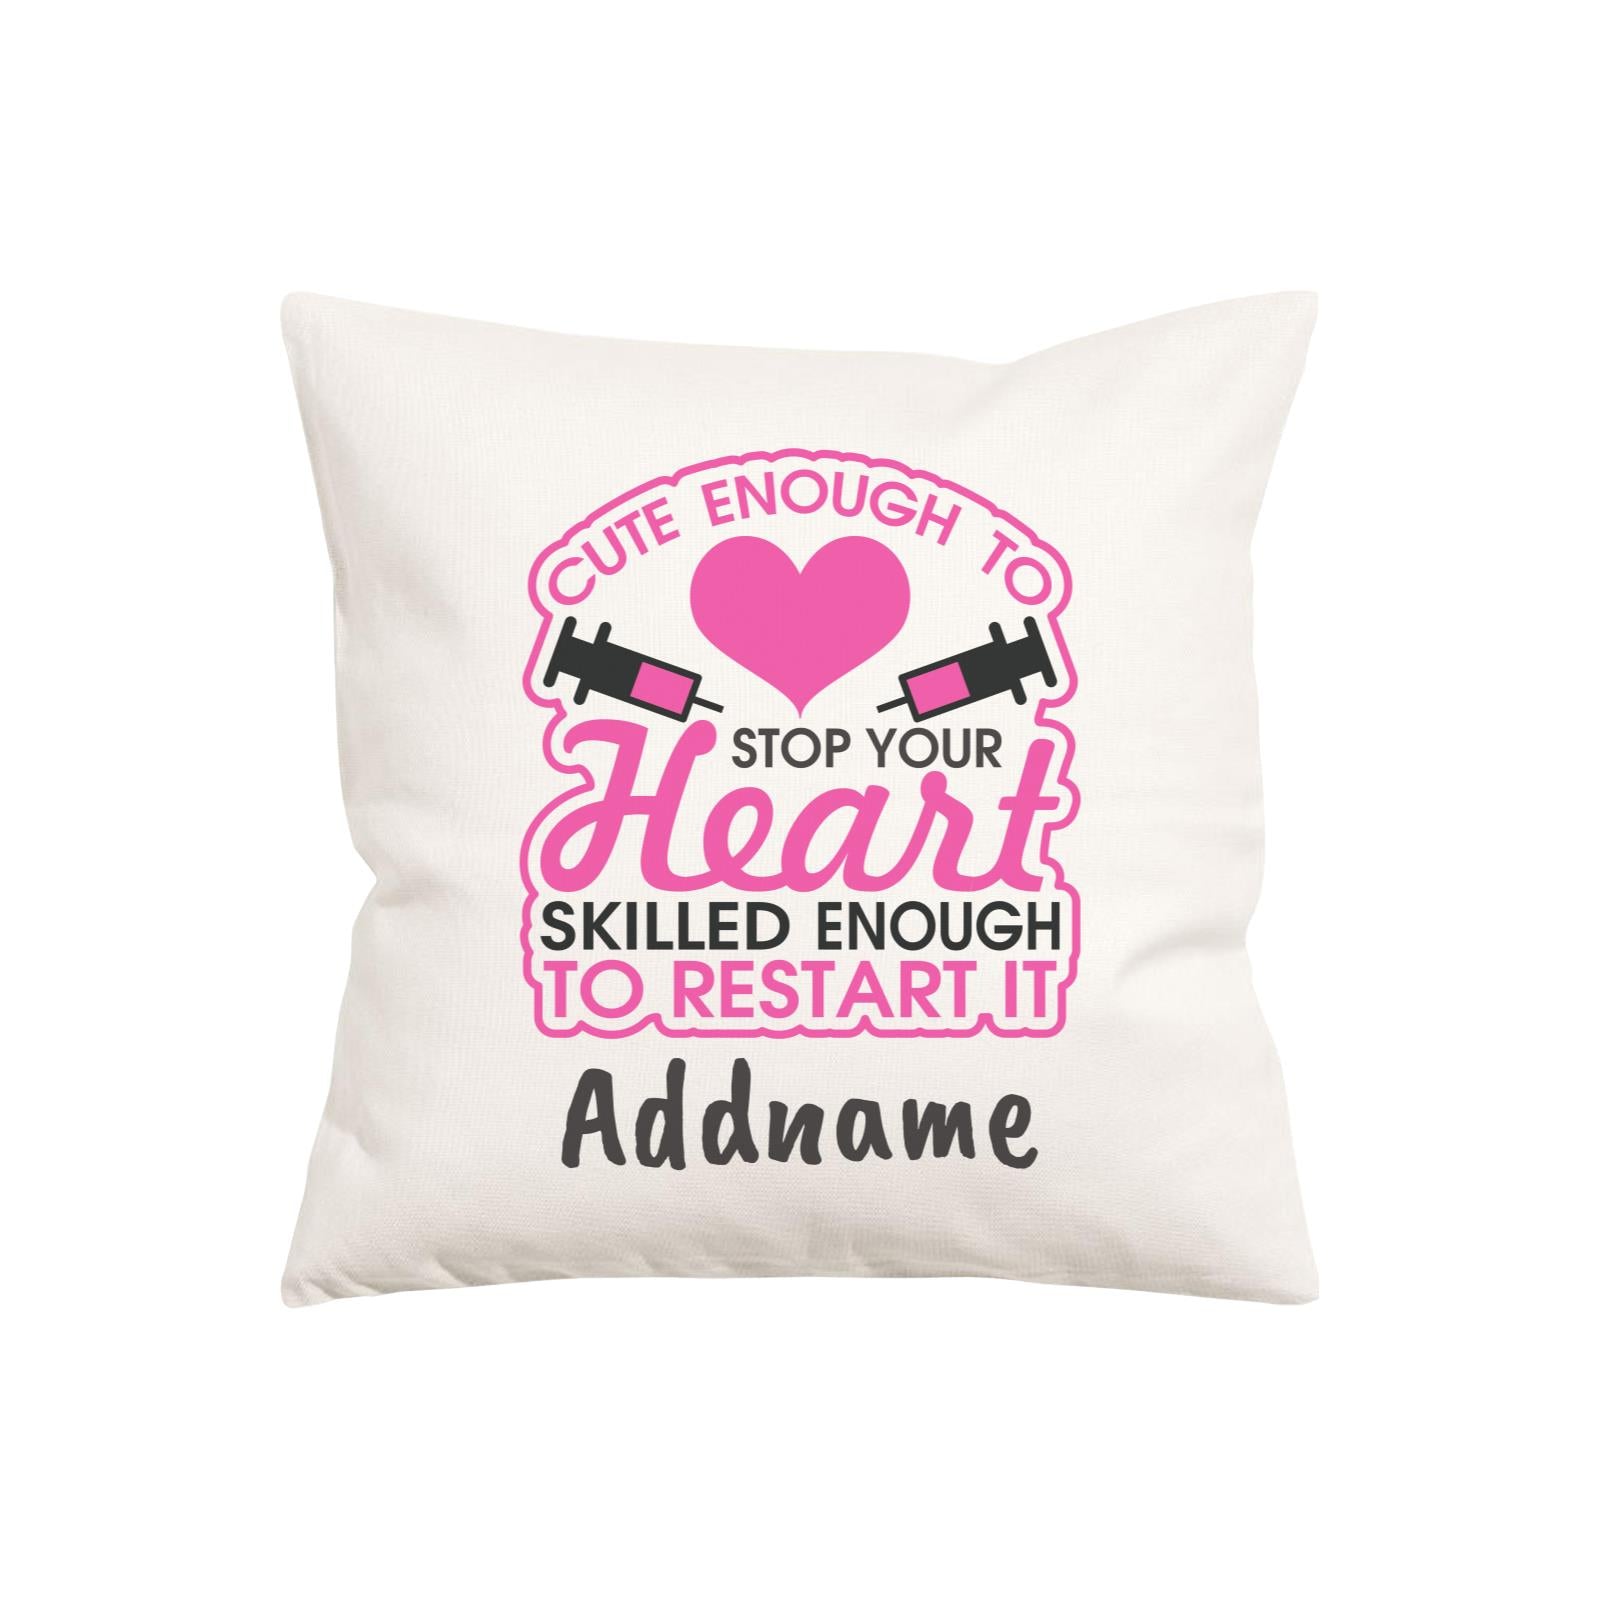 Nurse Series Cute Enough to Stop Your Heart, Skilles Enough to Restart It Pillow Cushion